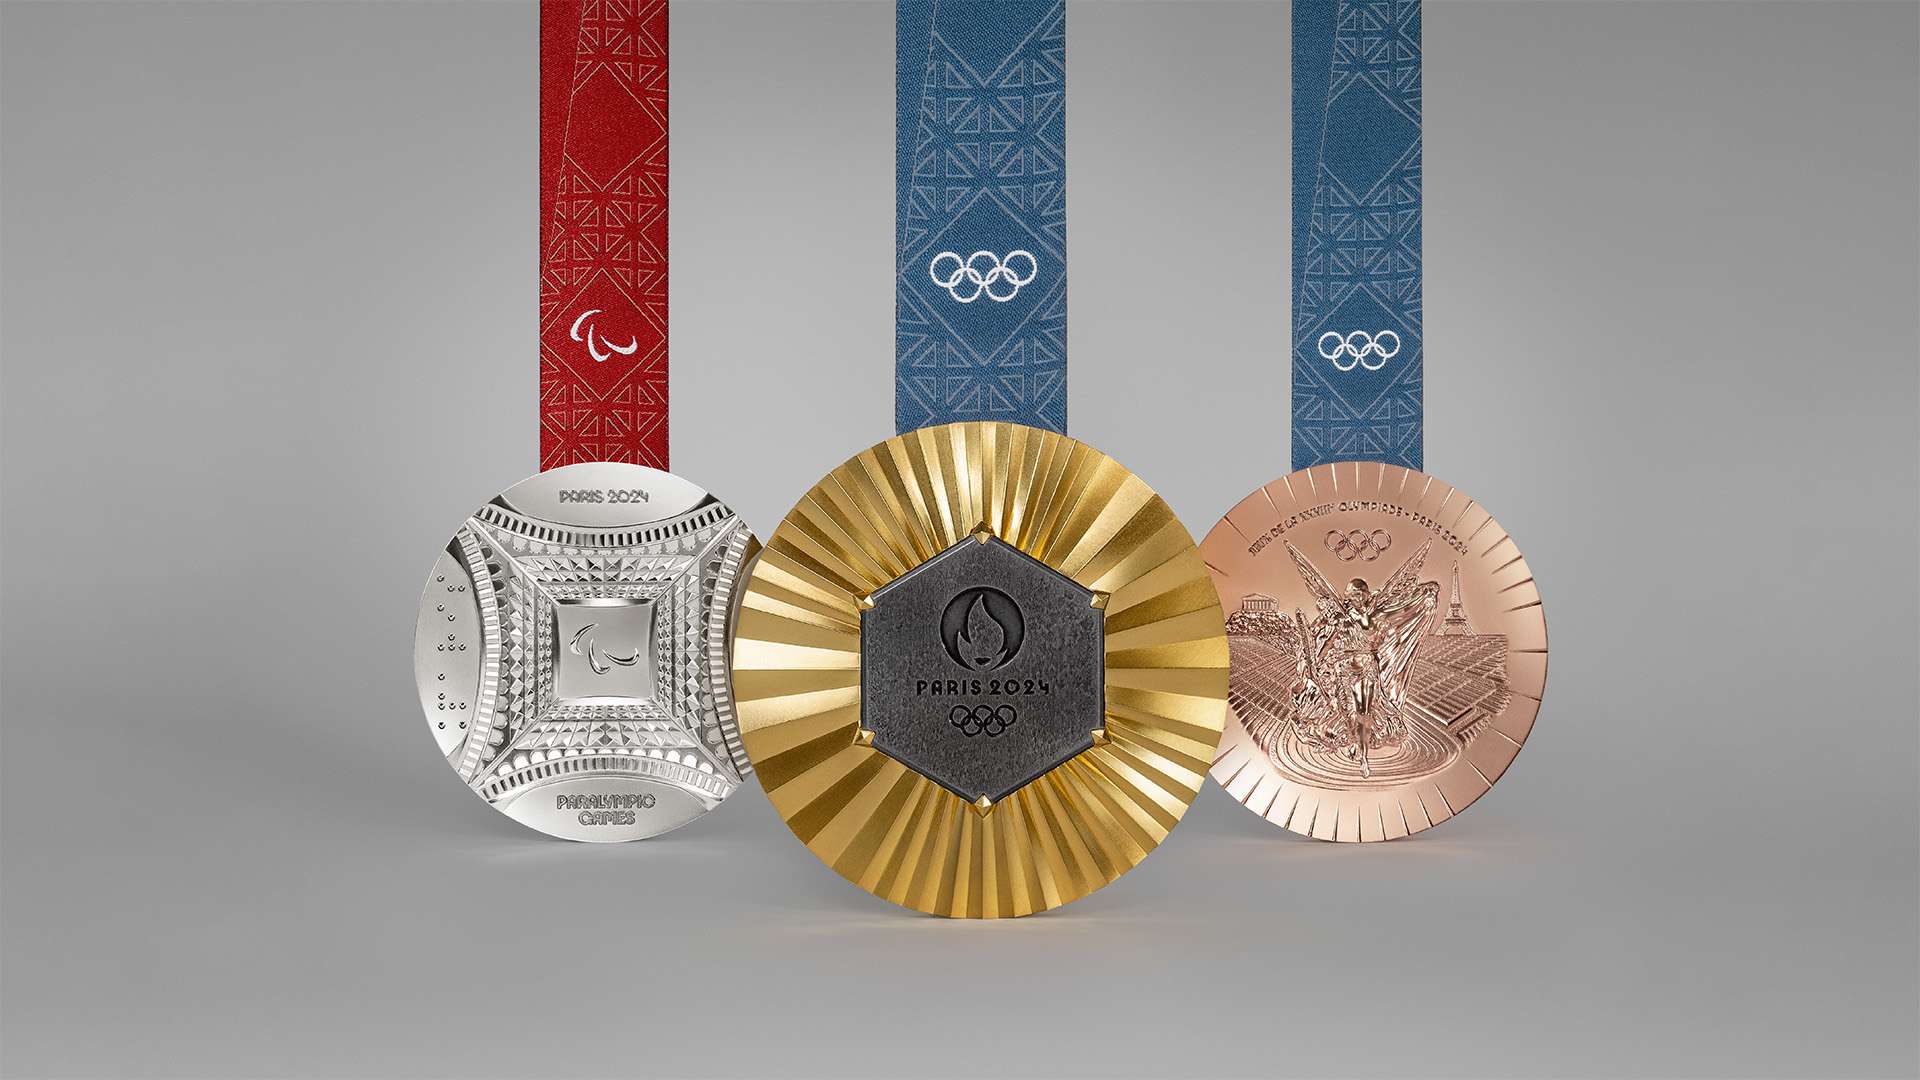 Olympic Paralympic Paris 2024 medals 